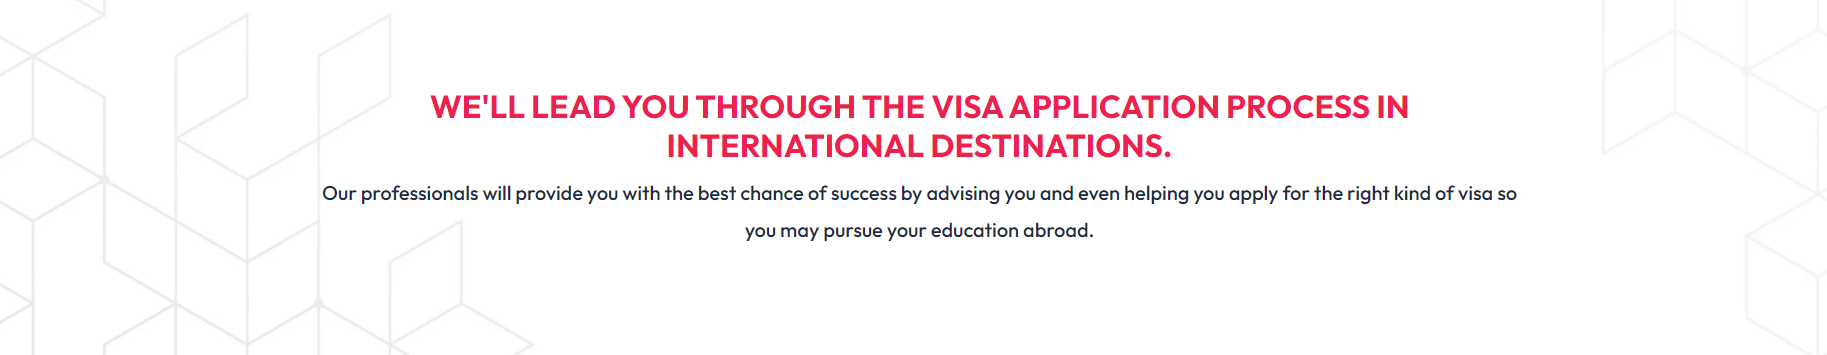 Free Visa Guidance for Study Abroad | BCES Admissions Abroad - Gurgaon Other